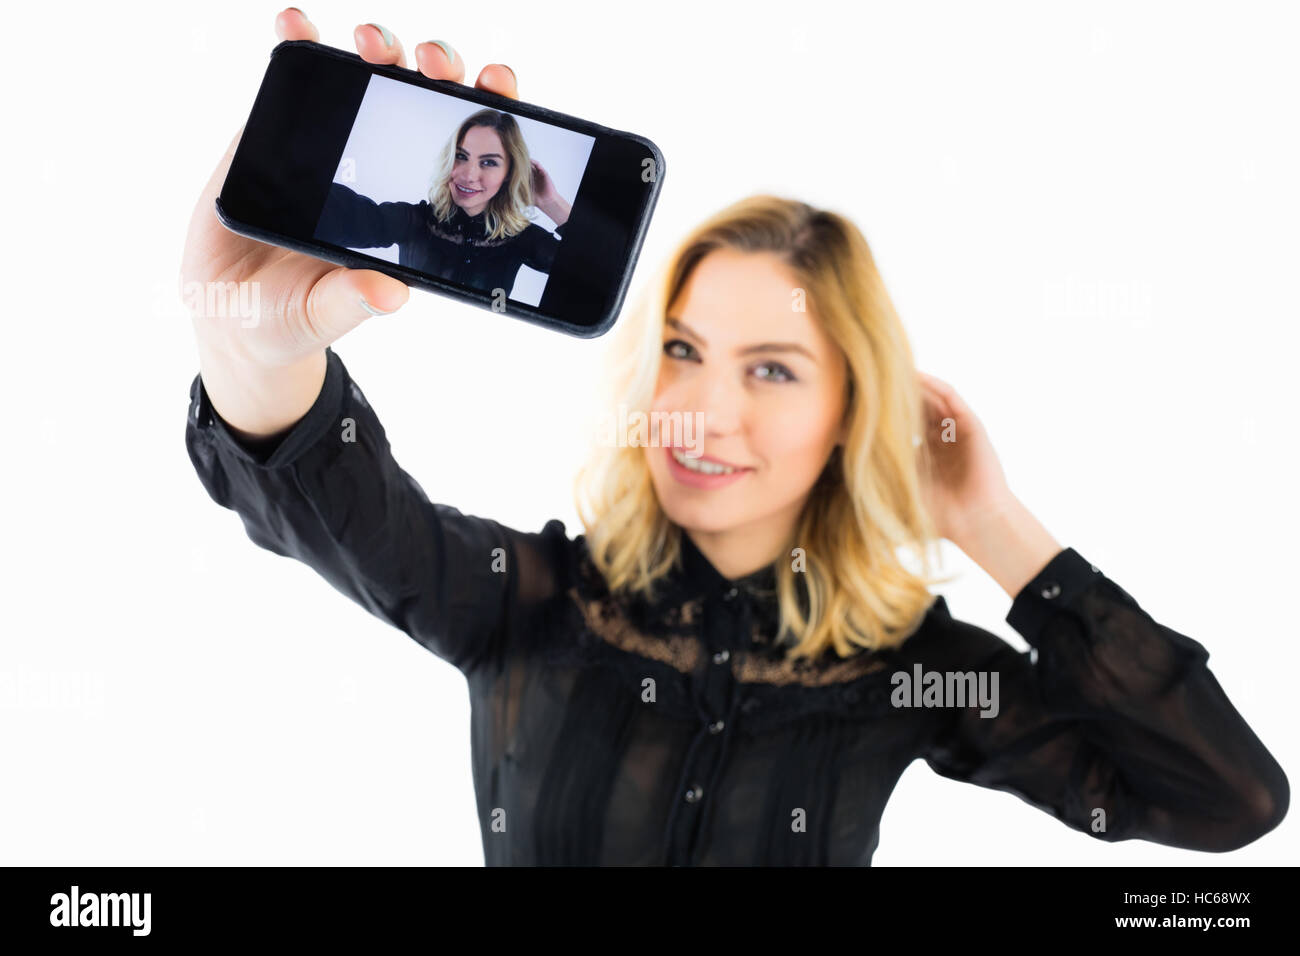 Smiling woman clicking photo from mobile phone against white background Stock Photo